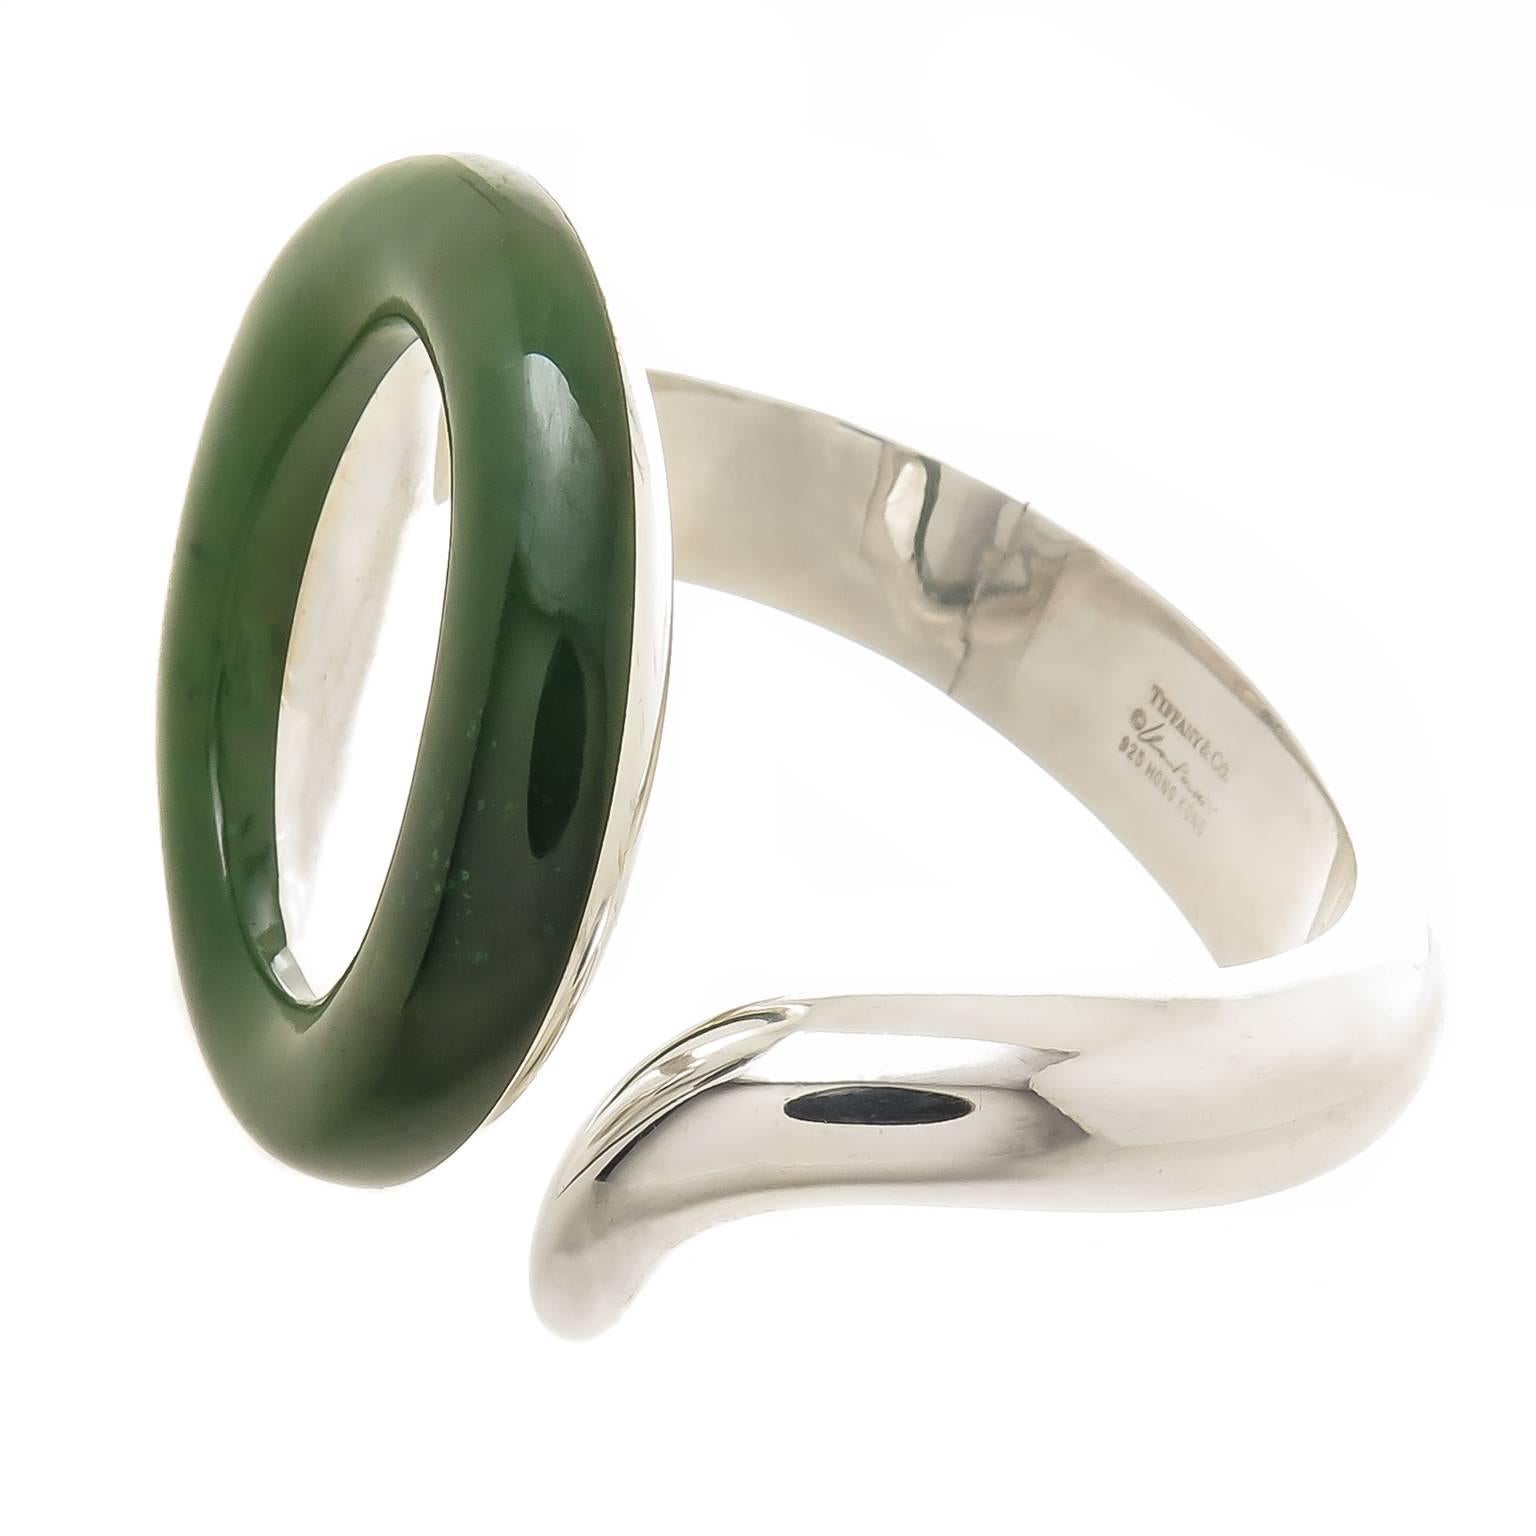 Circa 1990 Elsa Peretti for Tiffany & Company Sterling Silver and Jade Sevillana collection Bracelet. Deep Rich Green Jade circle measuring 2 X 2 Inch. Thick Solid construction with an inside measurement of 6 1/2 inch and having a hinge for easy on